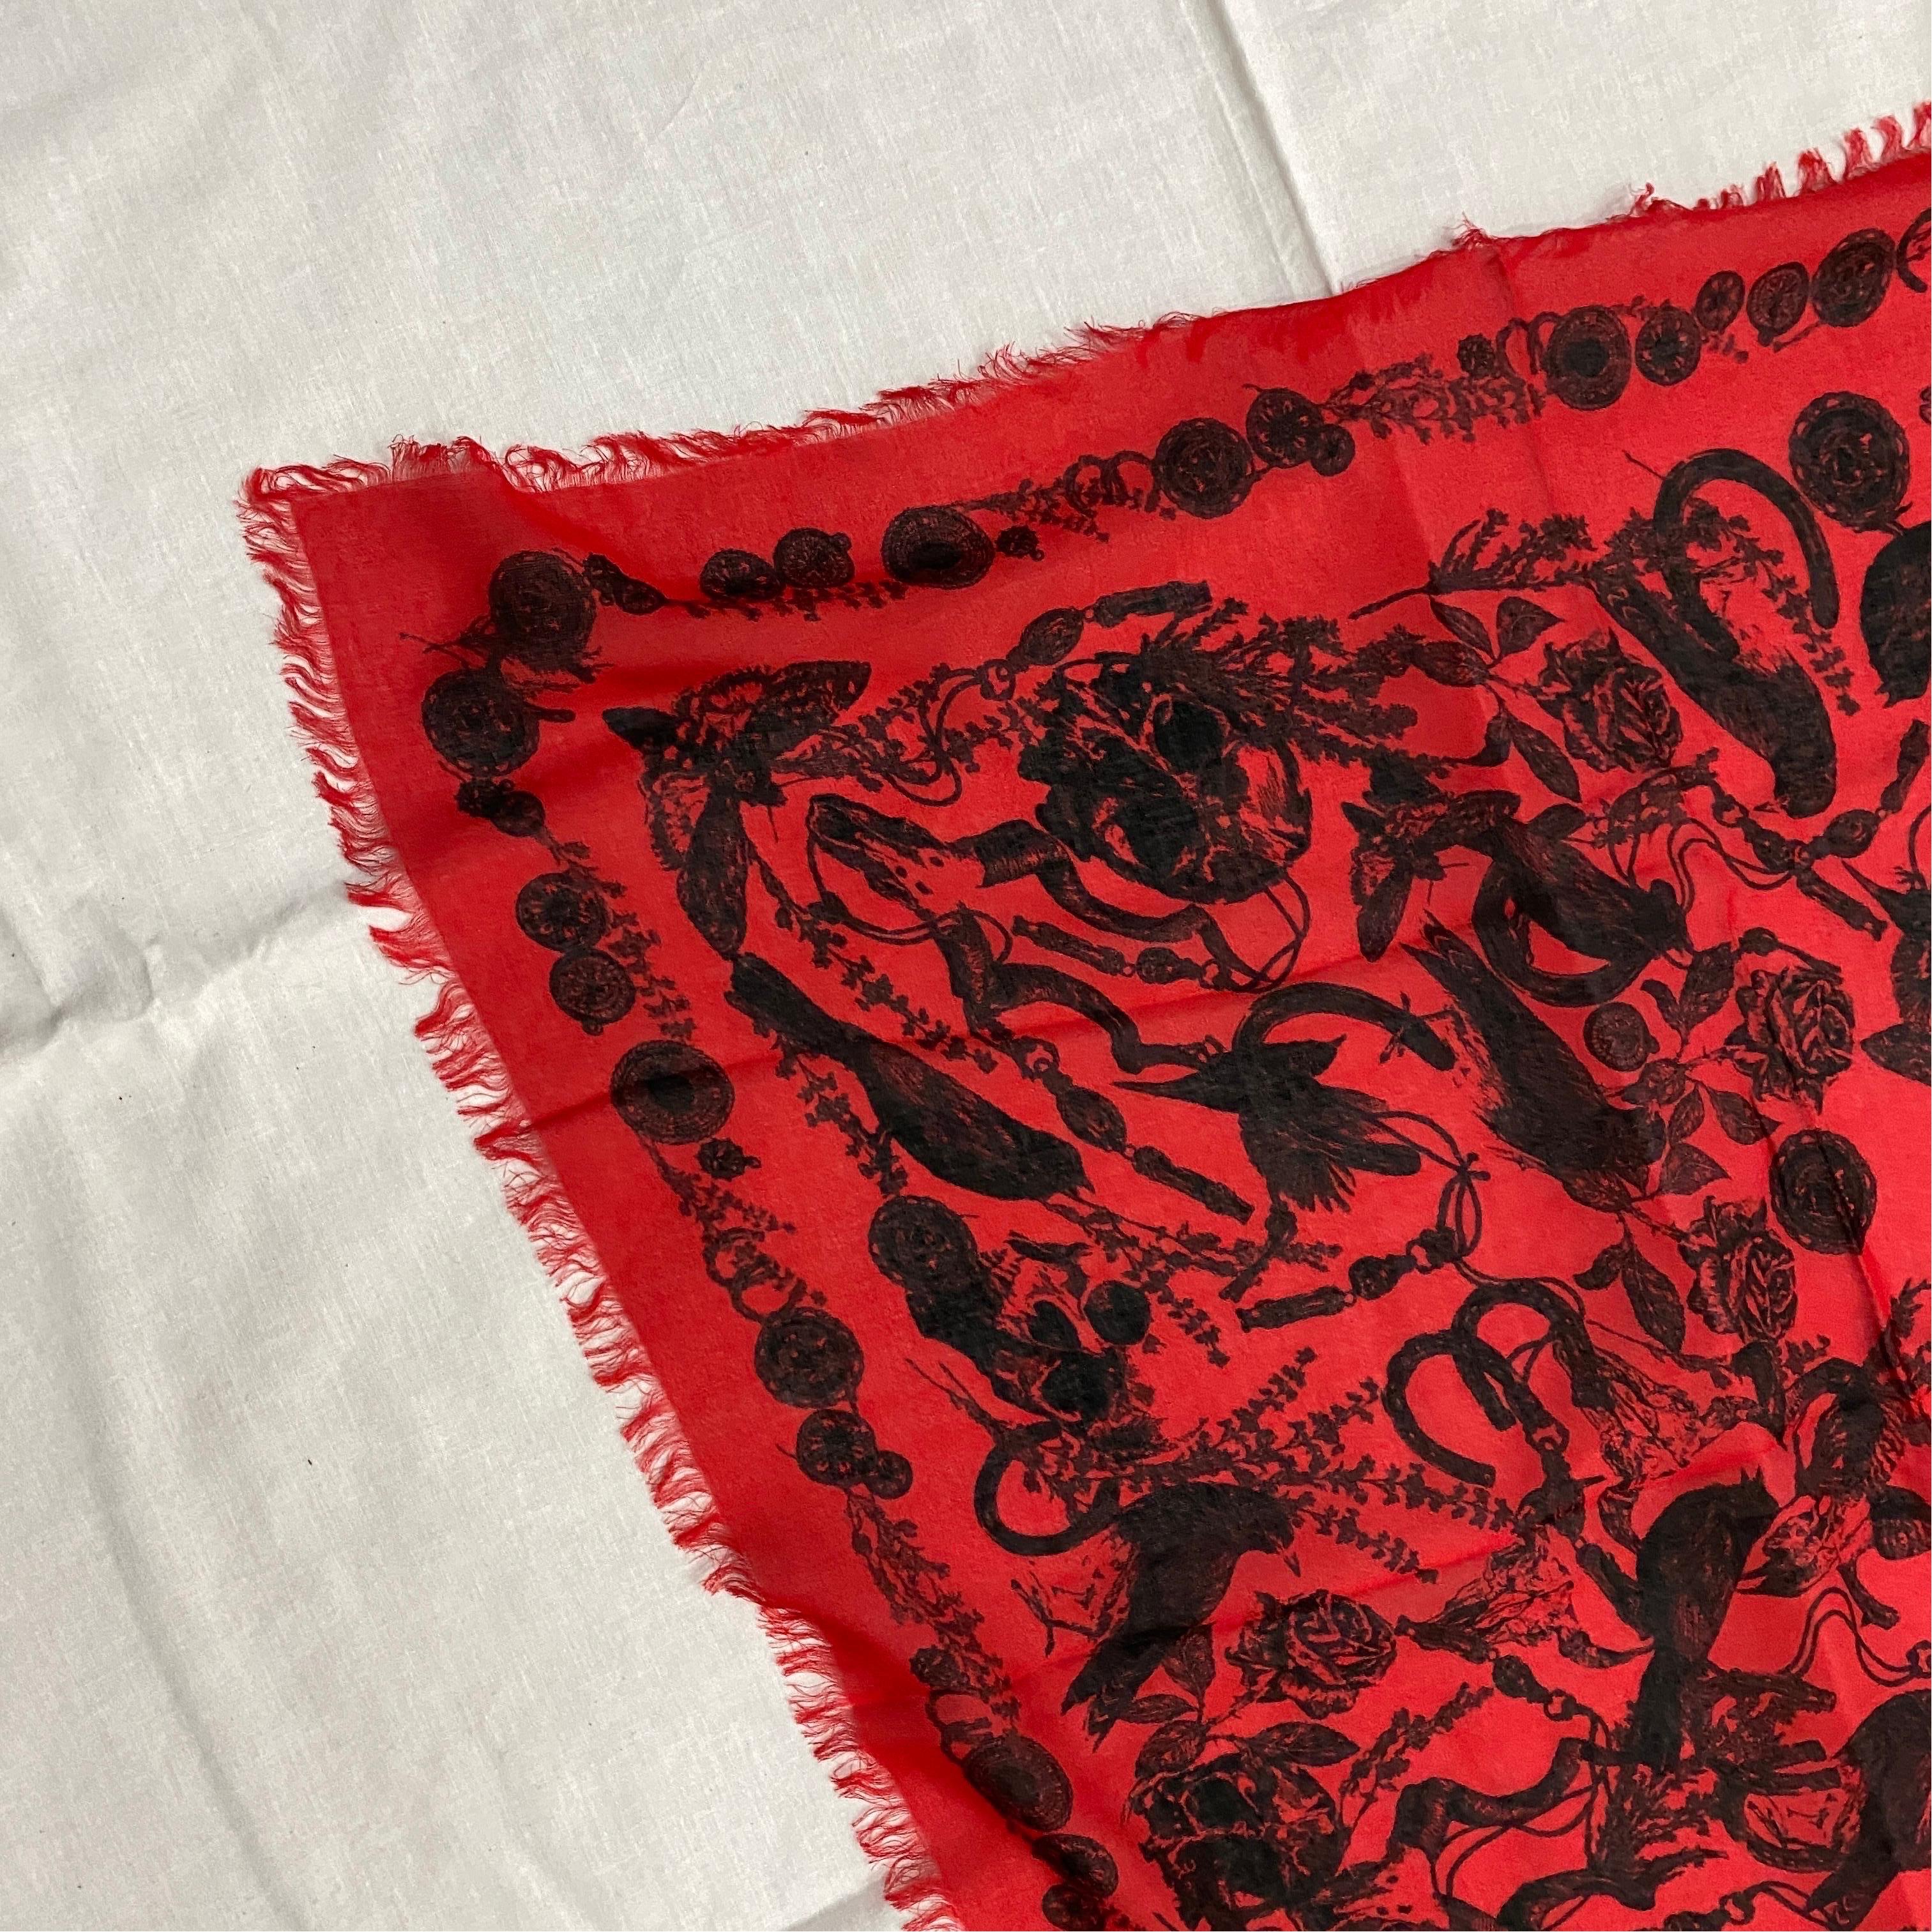 The Alexander McQueen Silk Italian Scarf is a beautiful and luxurious piece of fashion that reflects the innovative and creative style of the late designer Alexander McQueen. McQueen was known for his bold and provocative designs that pushed the